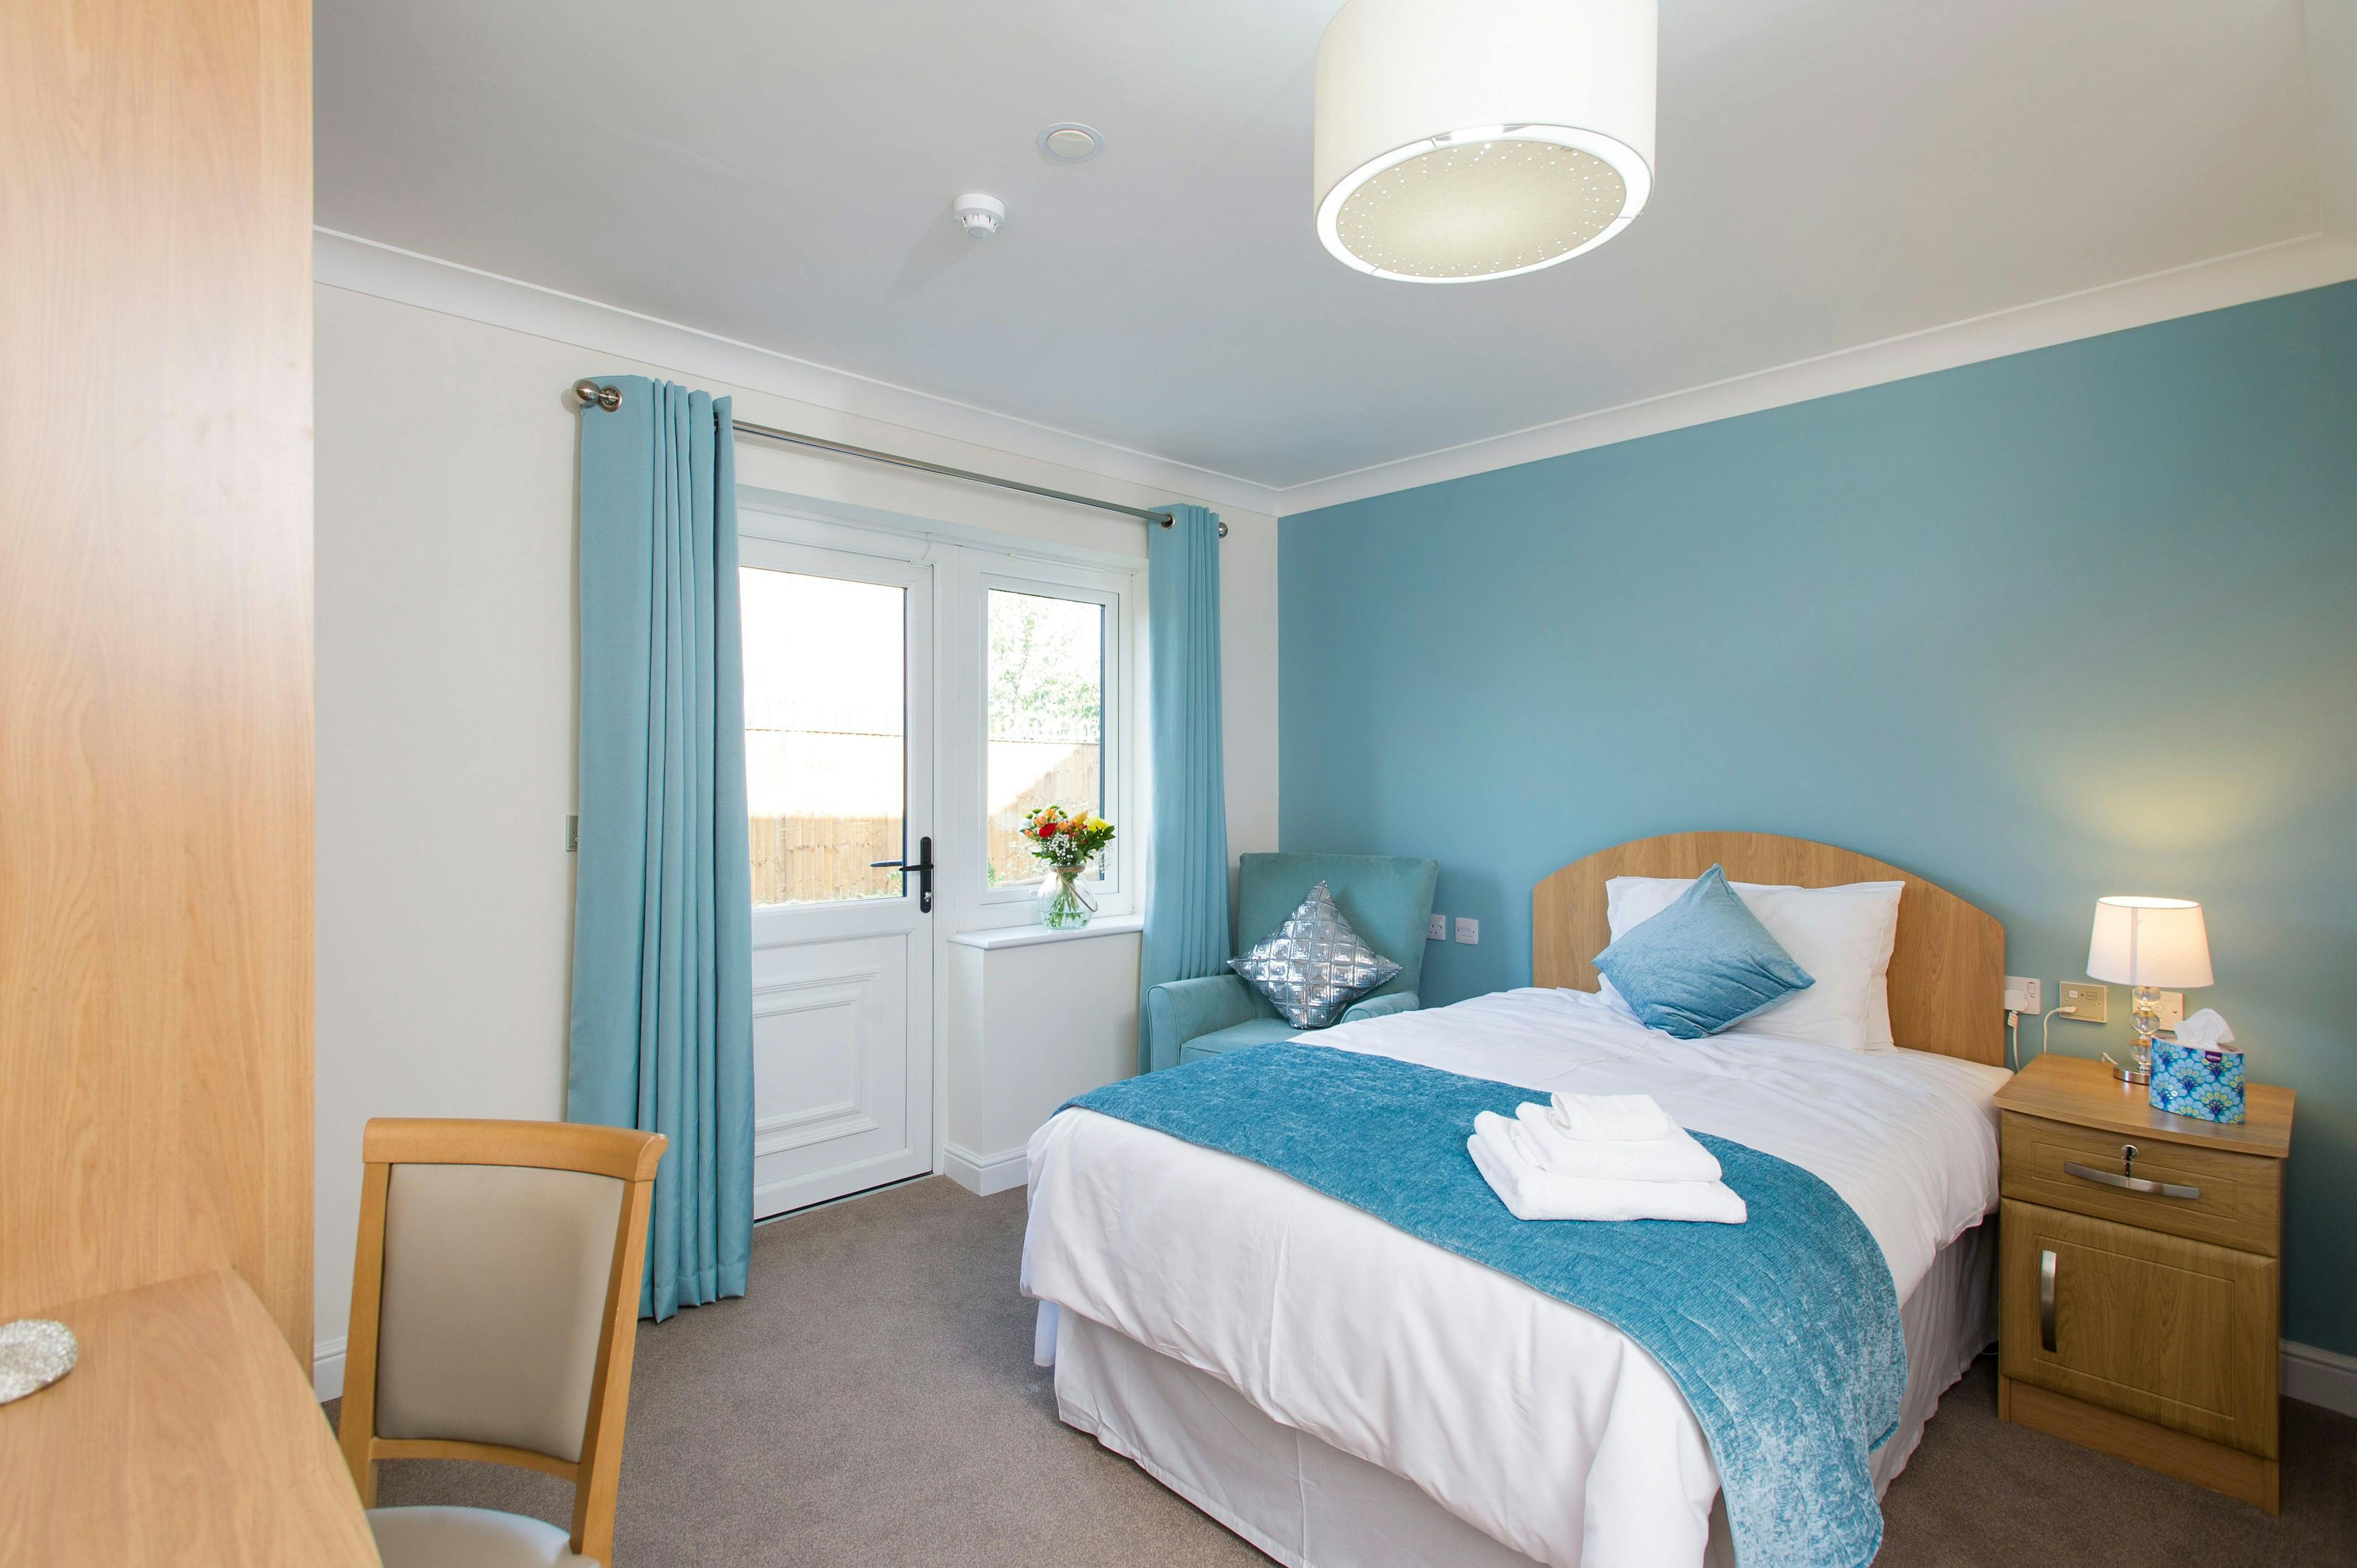 Bedroom at Barony Lodge Care Home in Nantwich, Cheshire